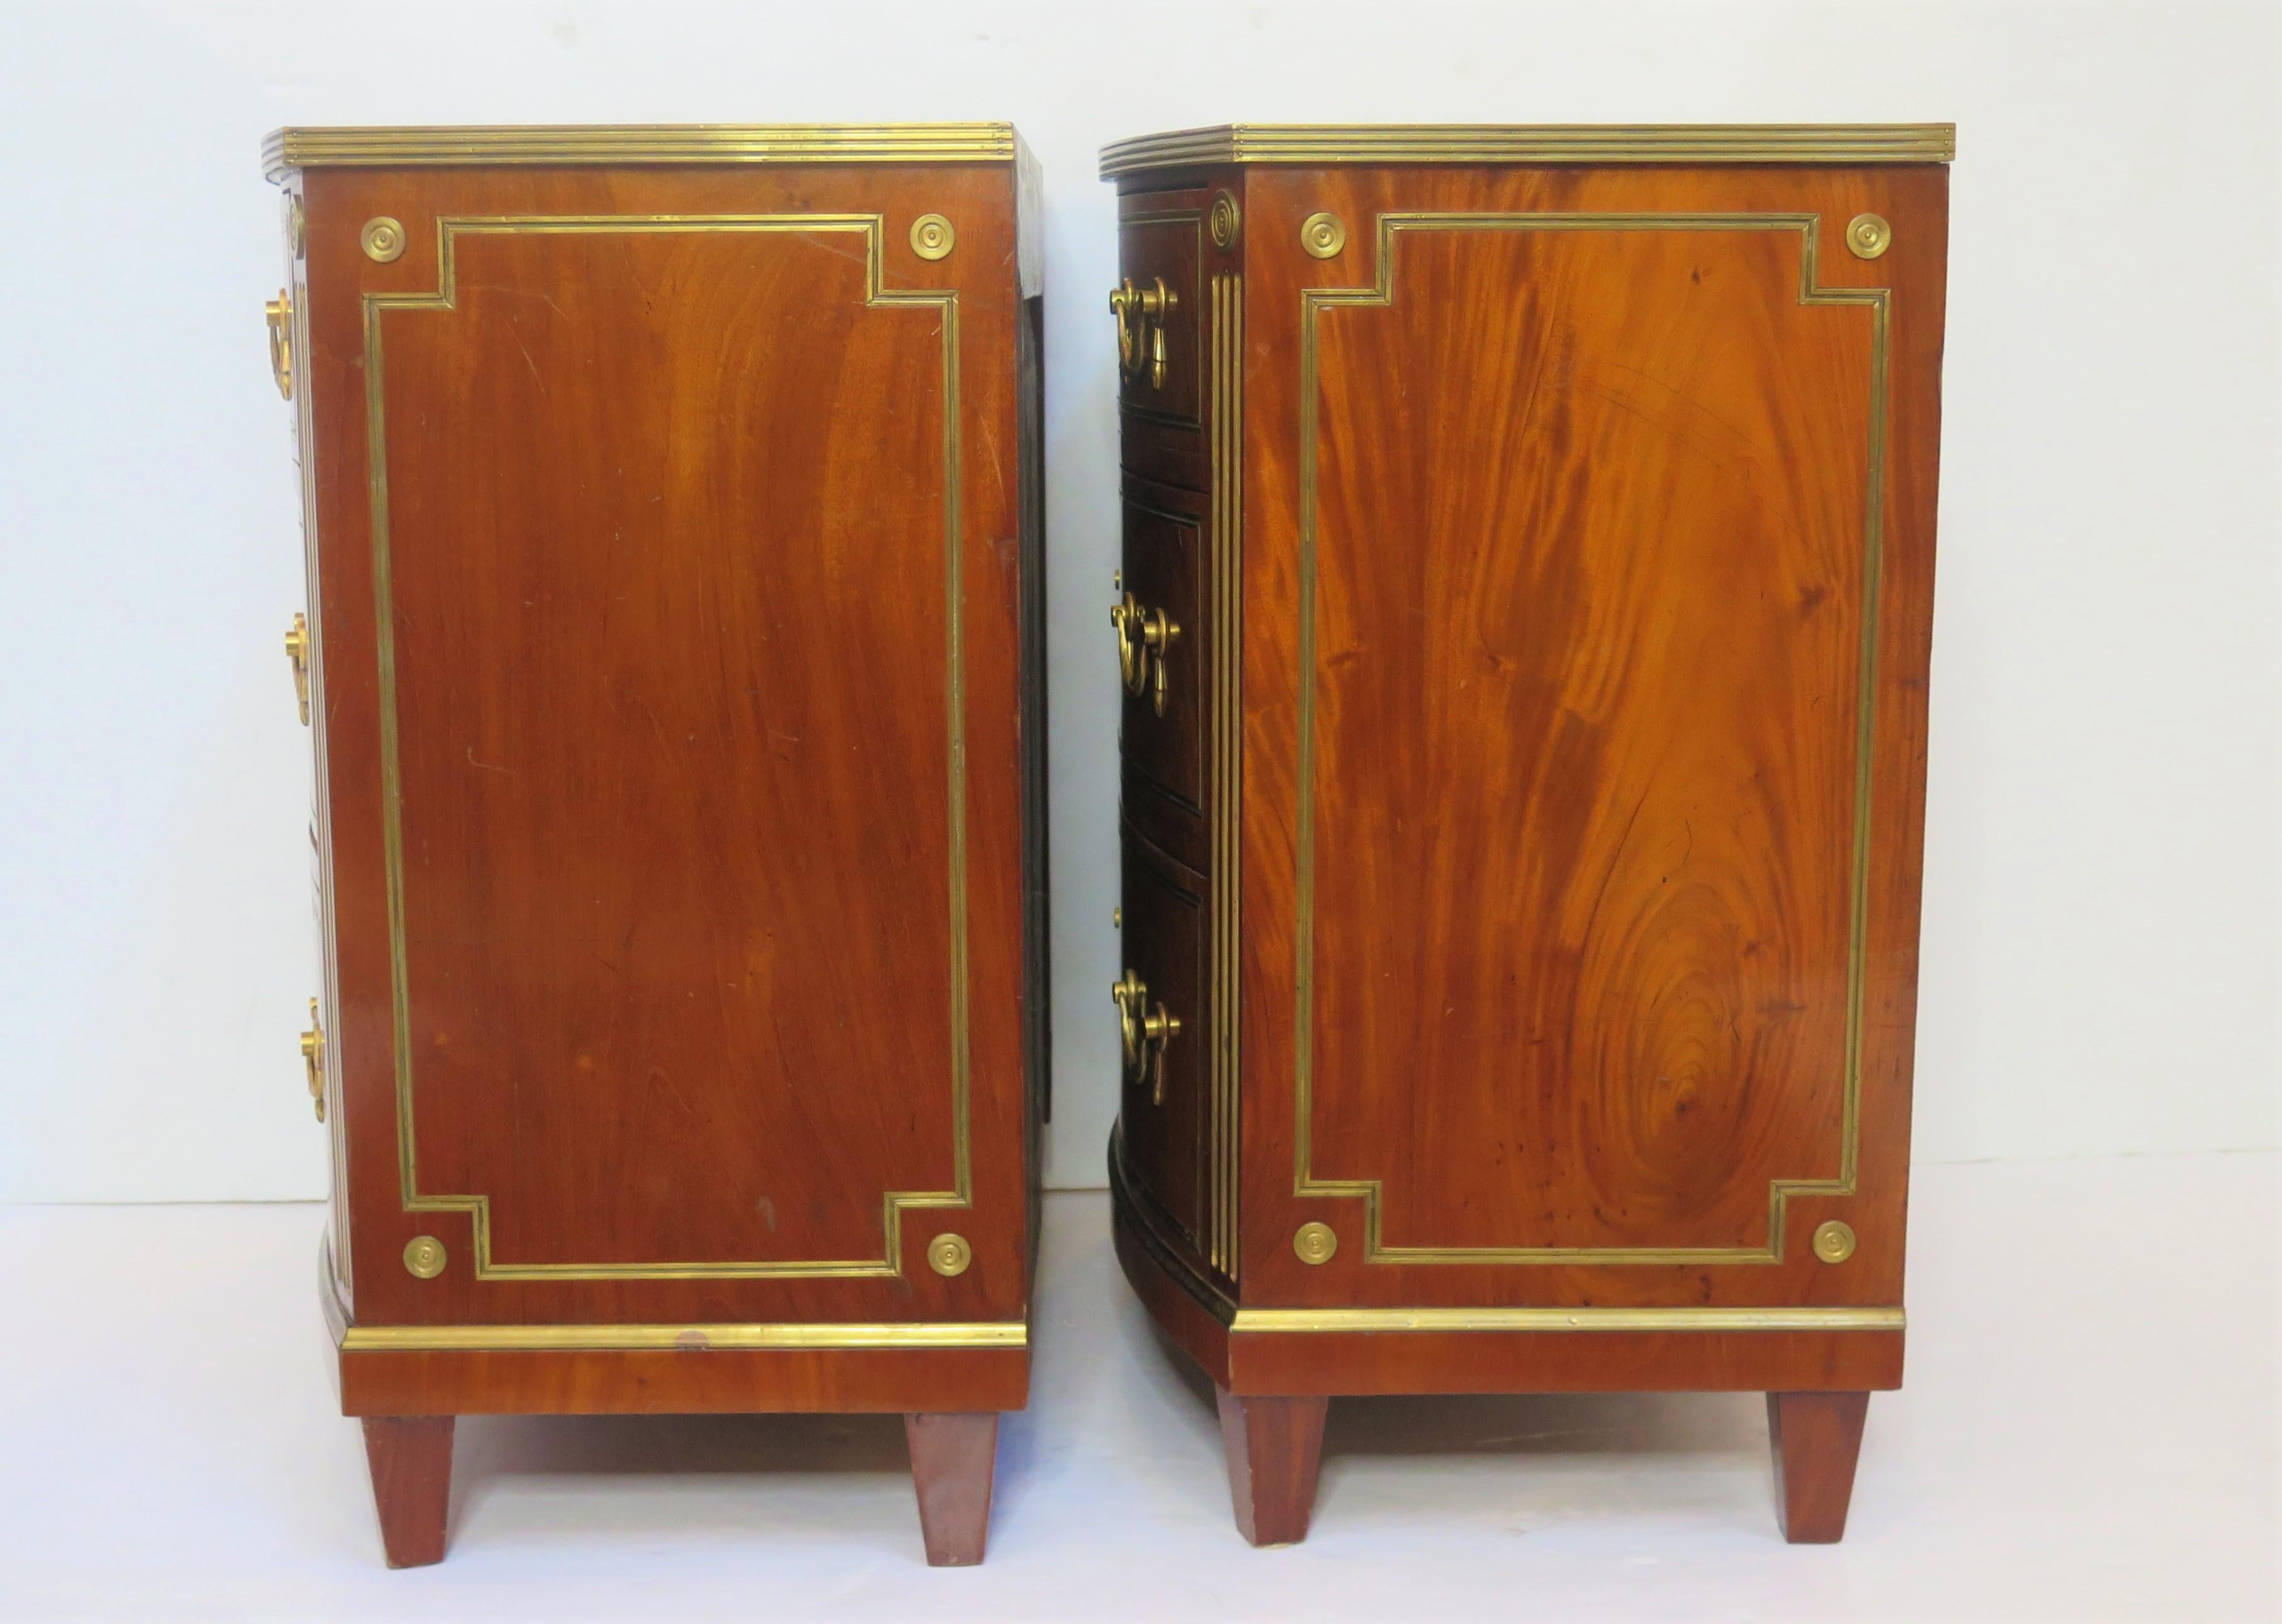 Gilt A Pair of Russian Neoclassical Chests of Drawers For Sale